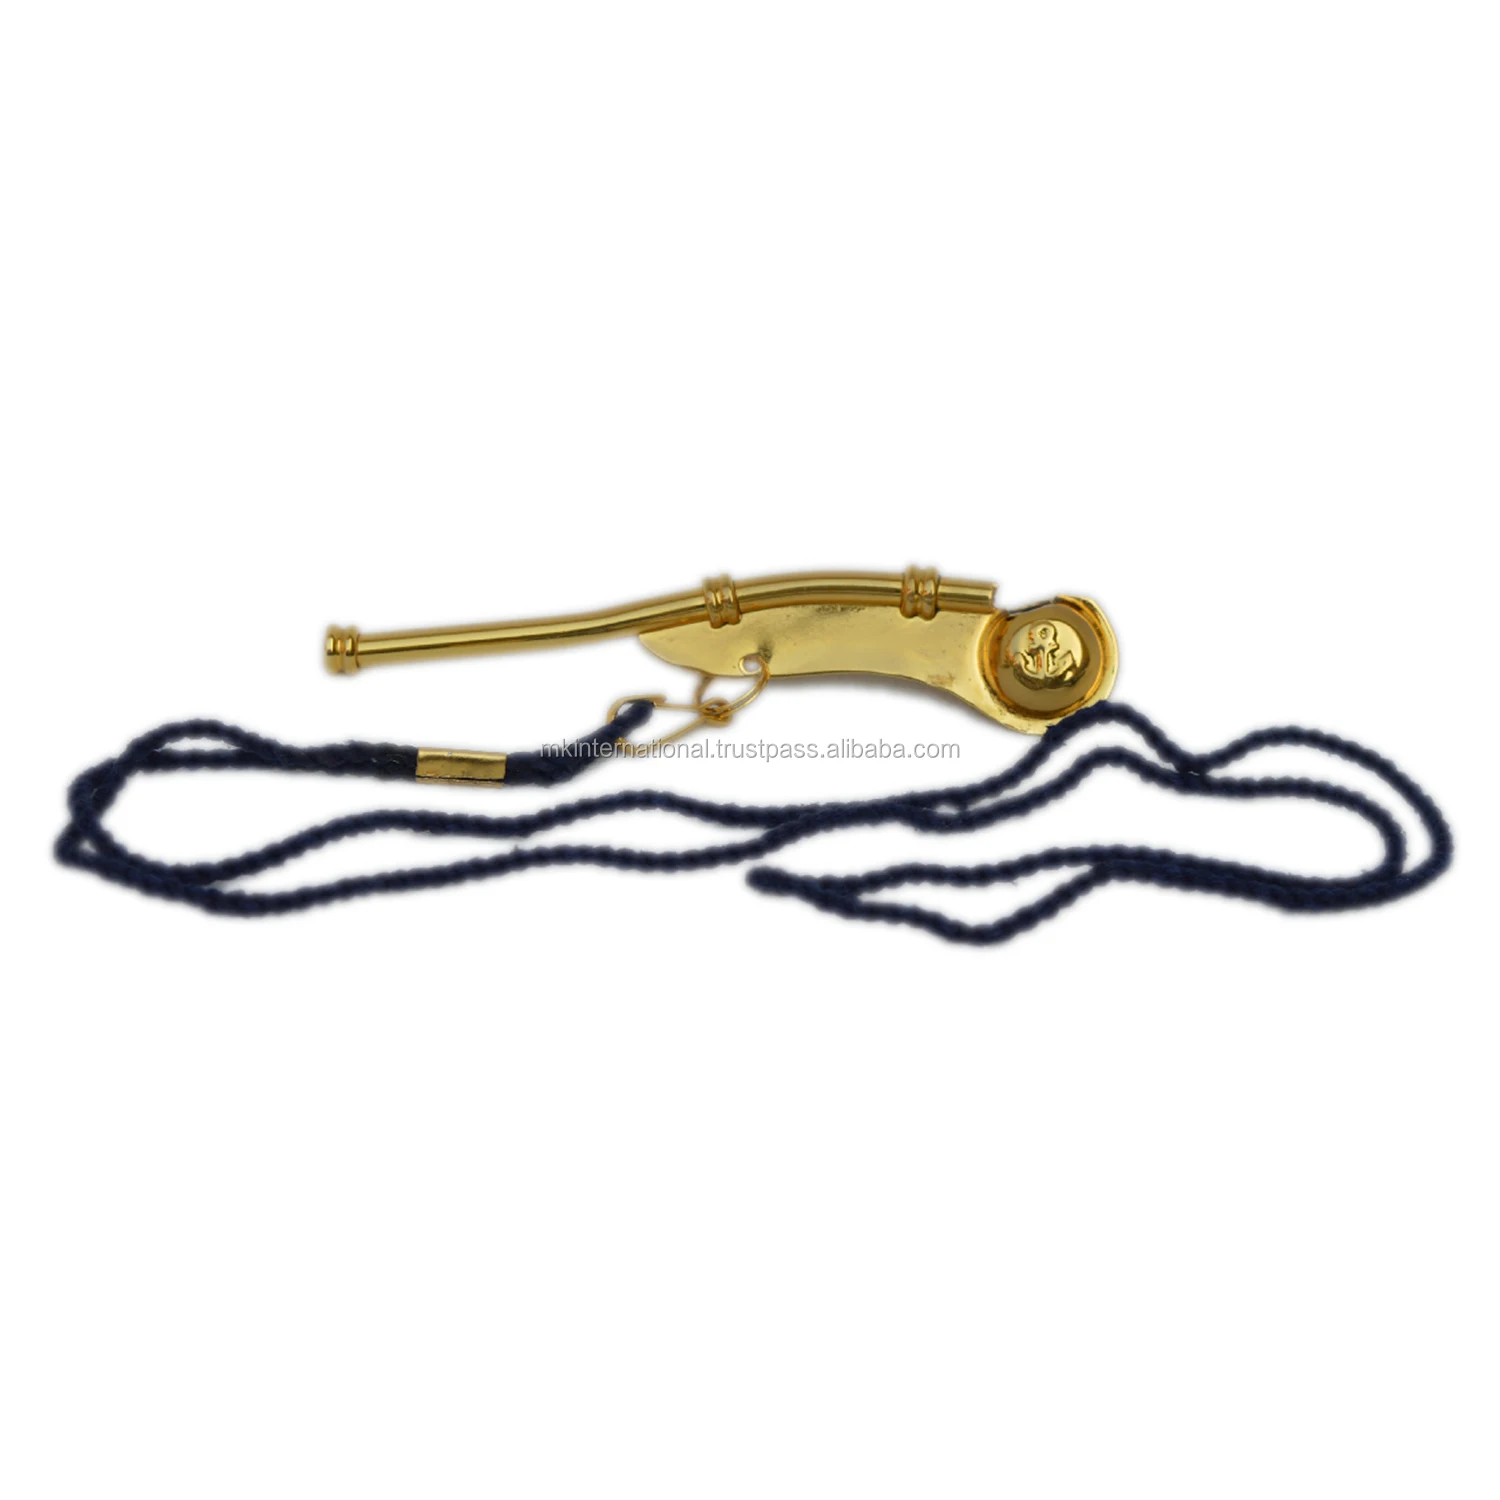 Details about   Lot of 10 pcs Brass Bosun's Whistle w Chain Bosun Call Pipe chrome finish 5" 